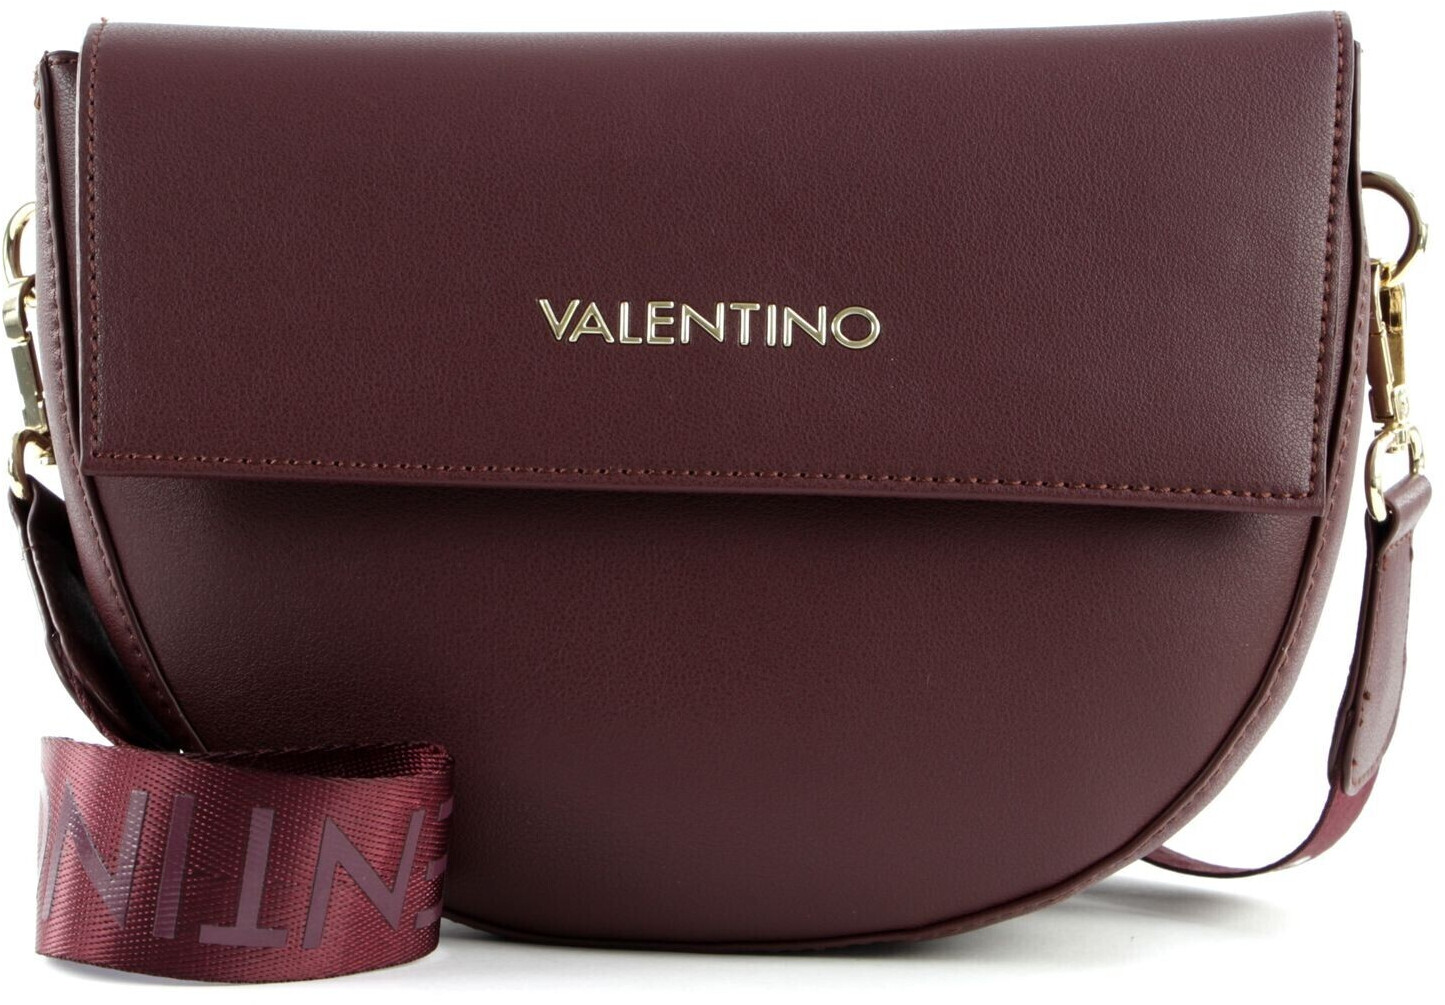 VALENTINO BAGS - Bigs Crossbody bag synthetic leather Black